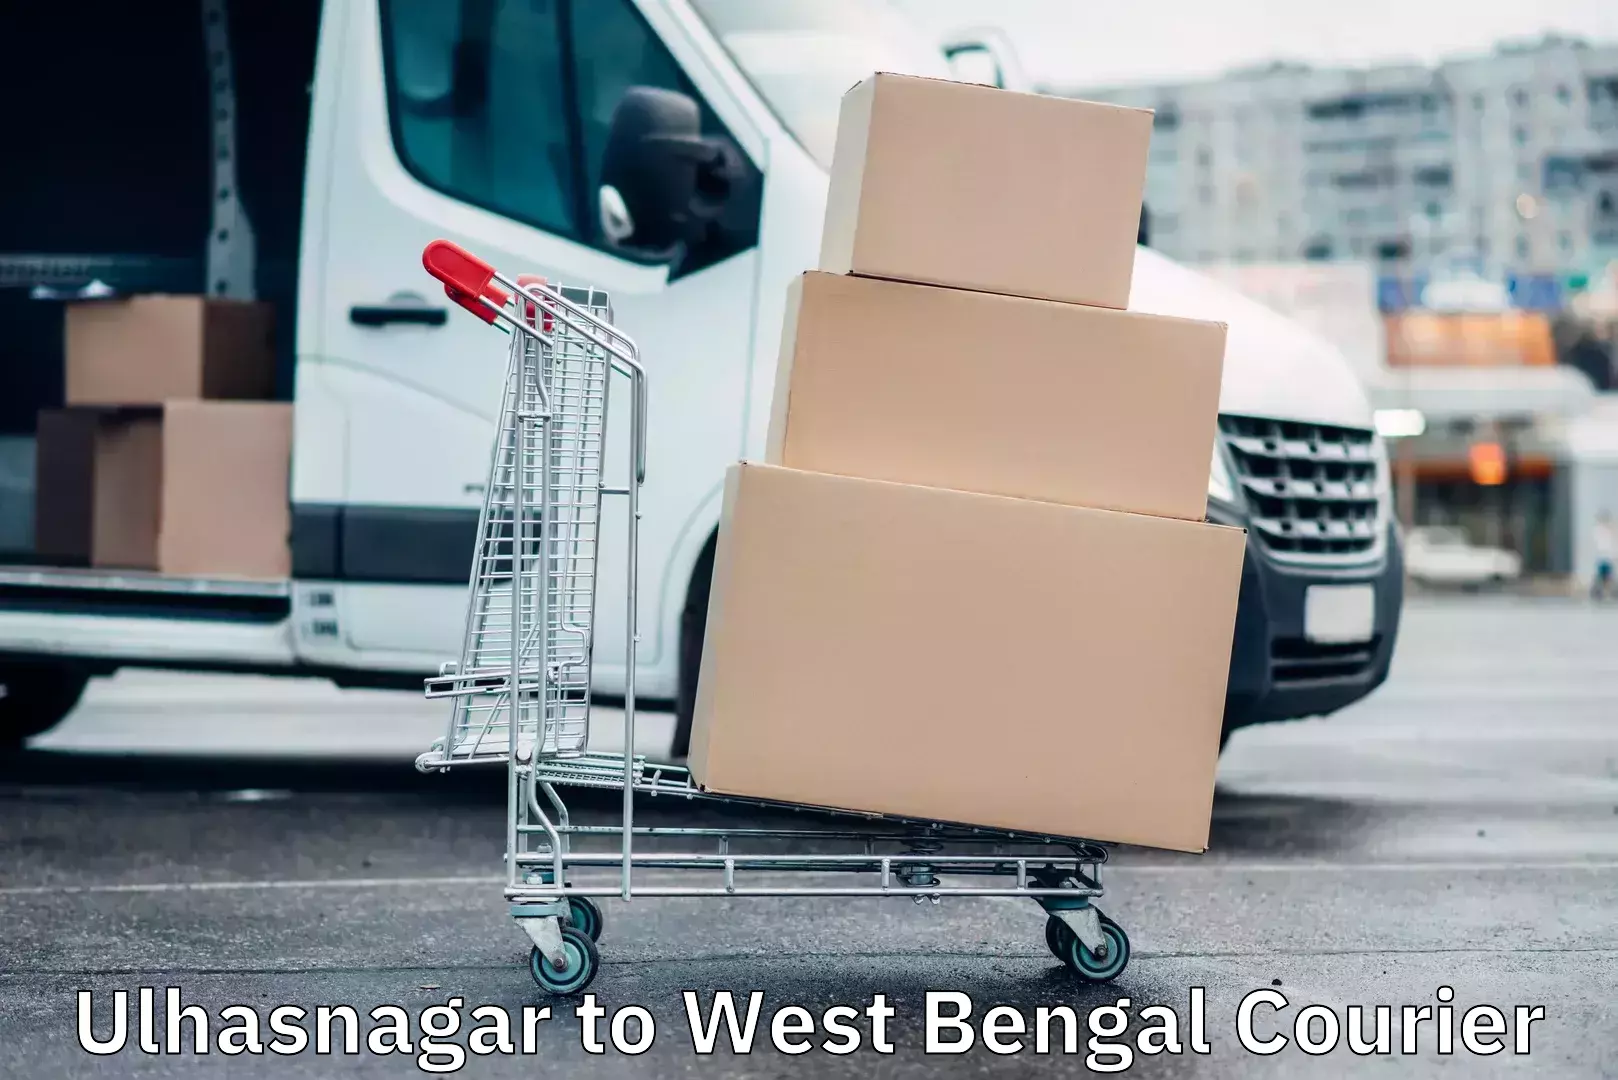 Speedy delivery service Ulhasnagar to West Bengal